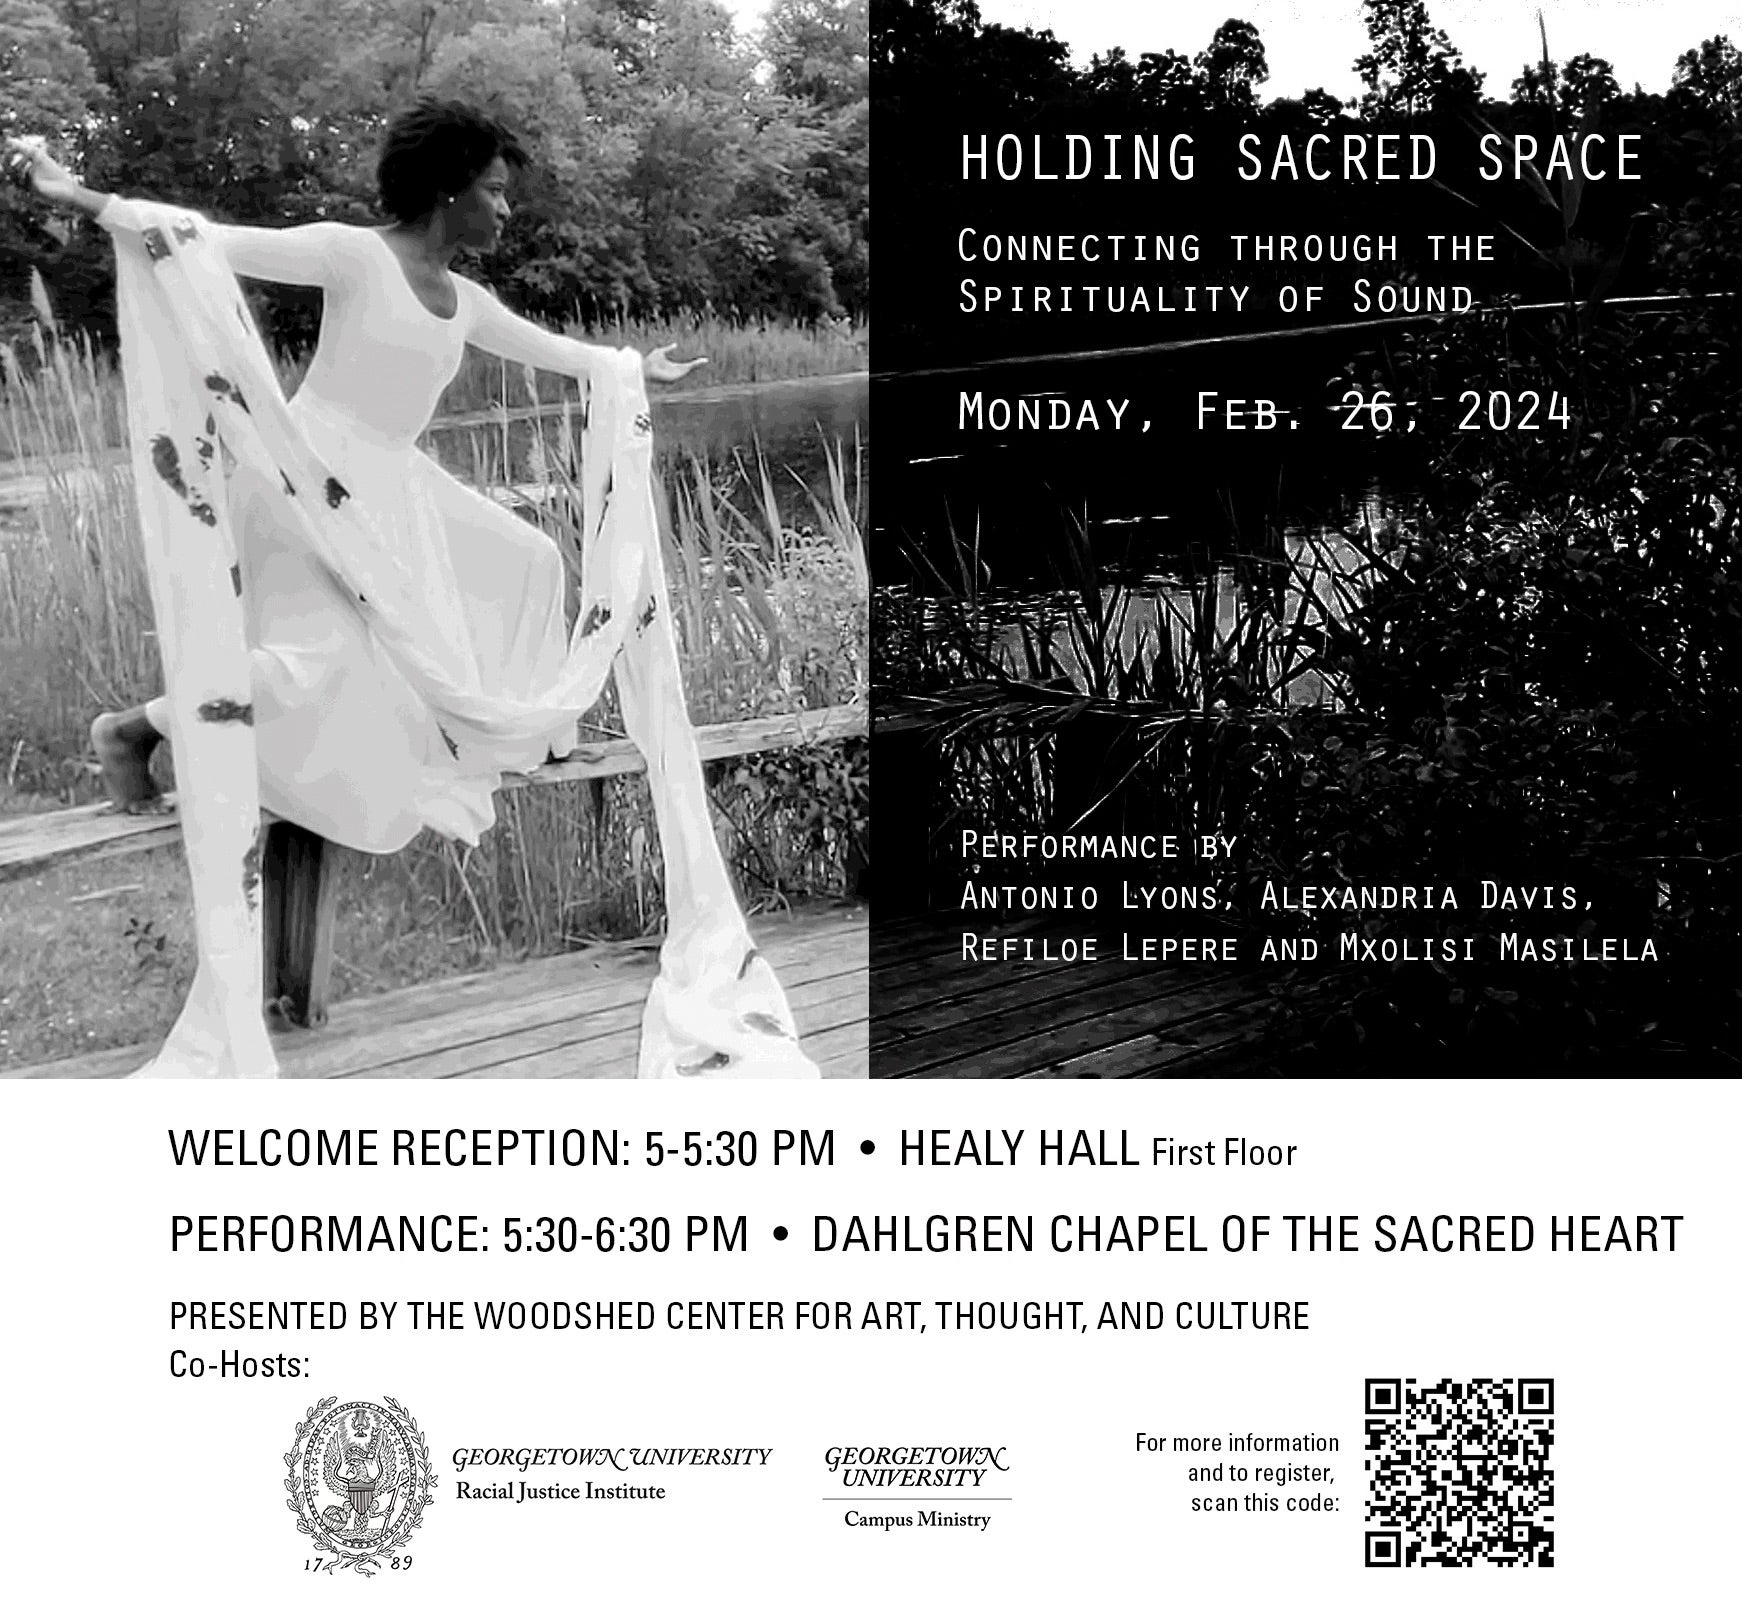 Graphic with woman dressed in white, in front of tall grass, with text: "Holding Sacred Space: Connecting through the Spirituality of Sound; Performance by Antonio Lyons, Alexandria Davis, Refiloe Lepere and Mxolise Masilela."